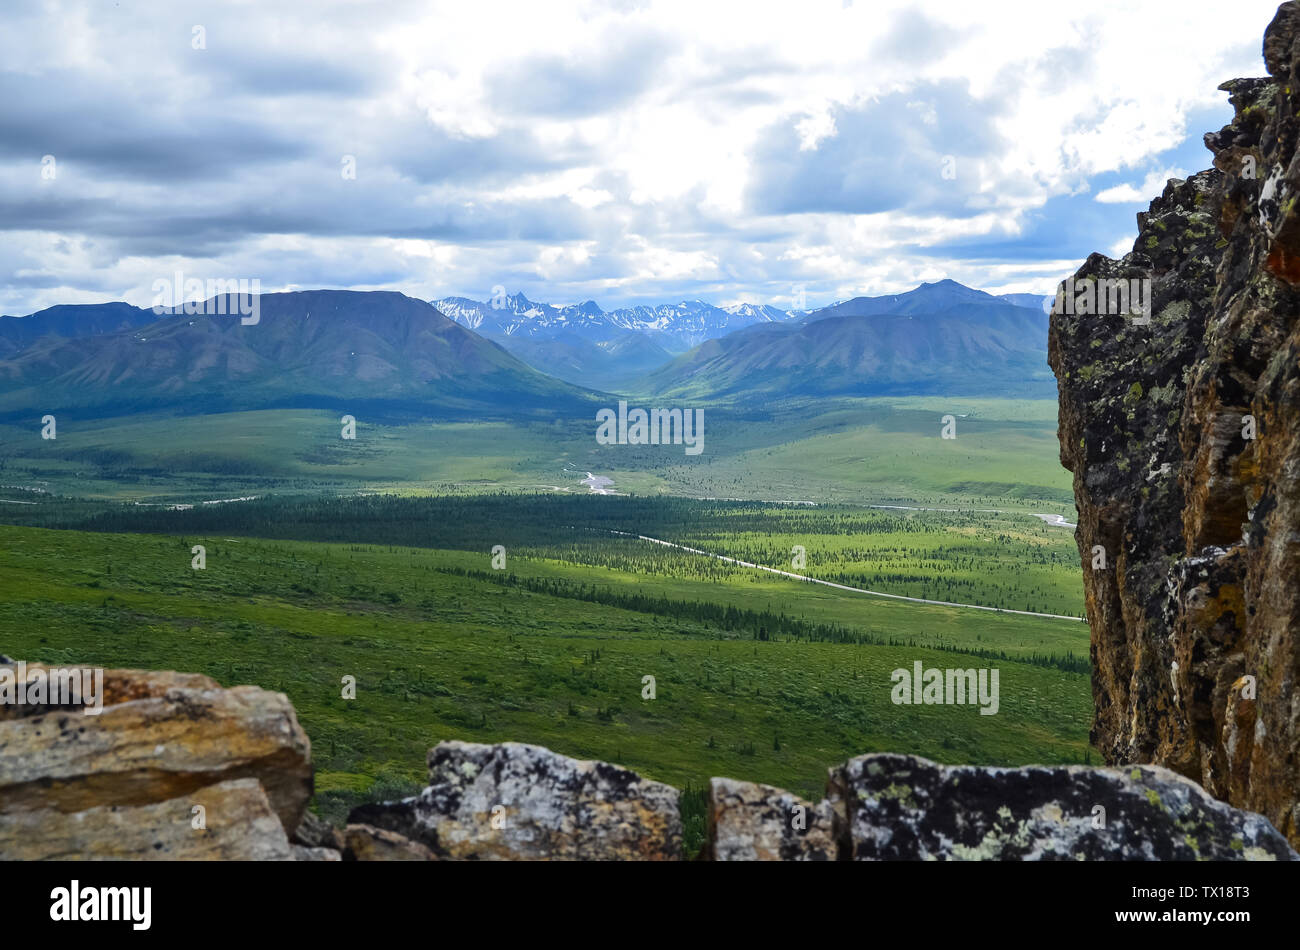 Panoramic view of Denali Naional Park valley with snow covered Alaska mountain range in the background and cloudy sky. North America, United States Stock Photo